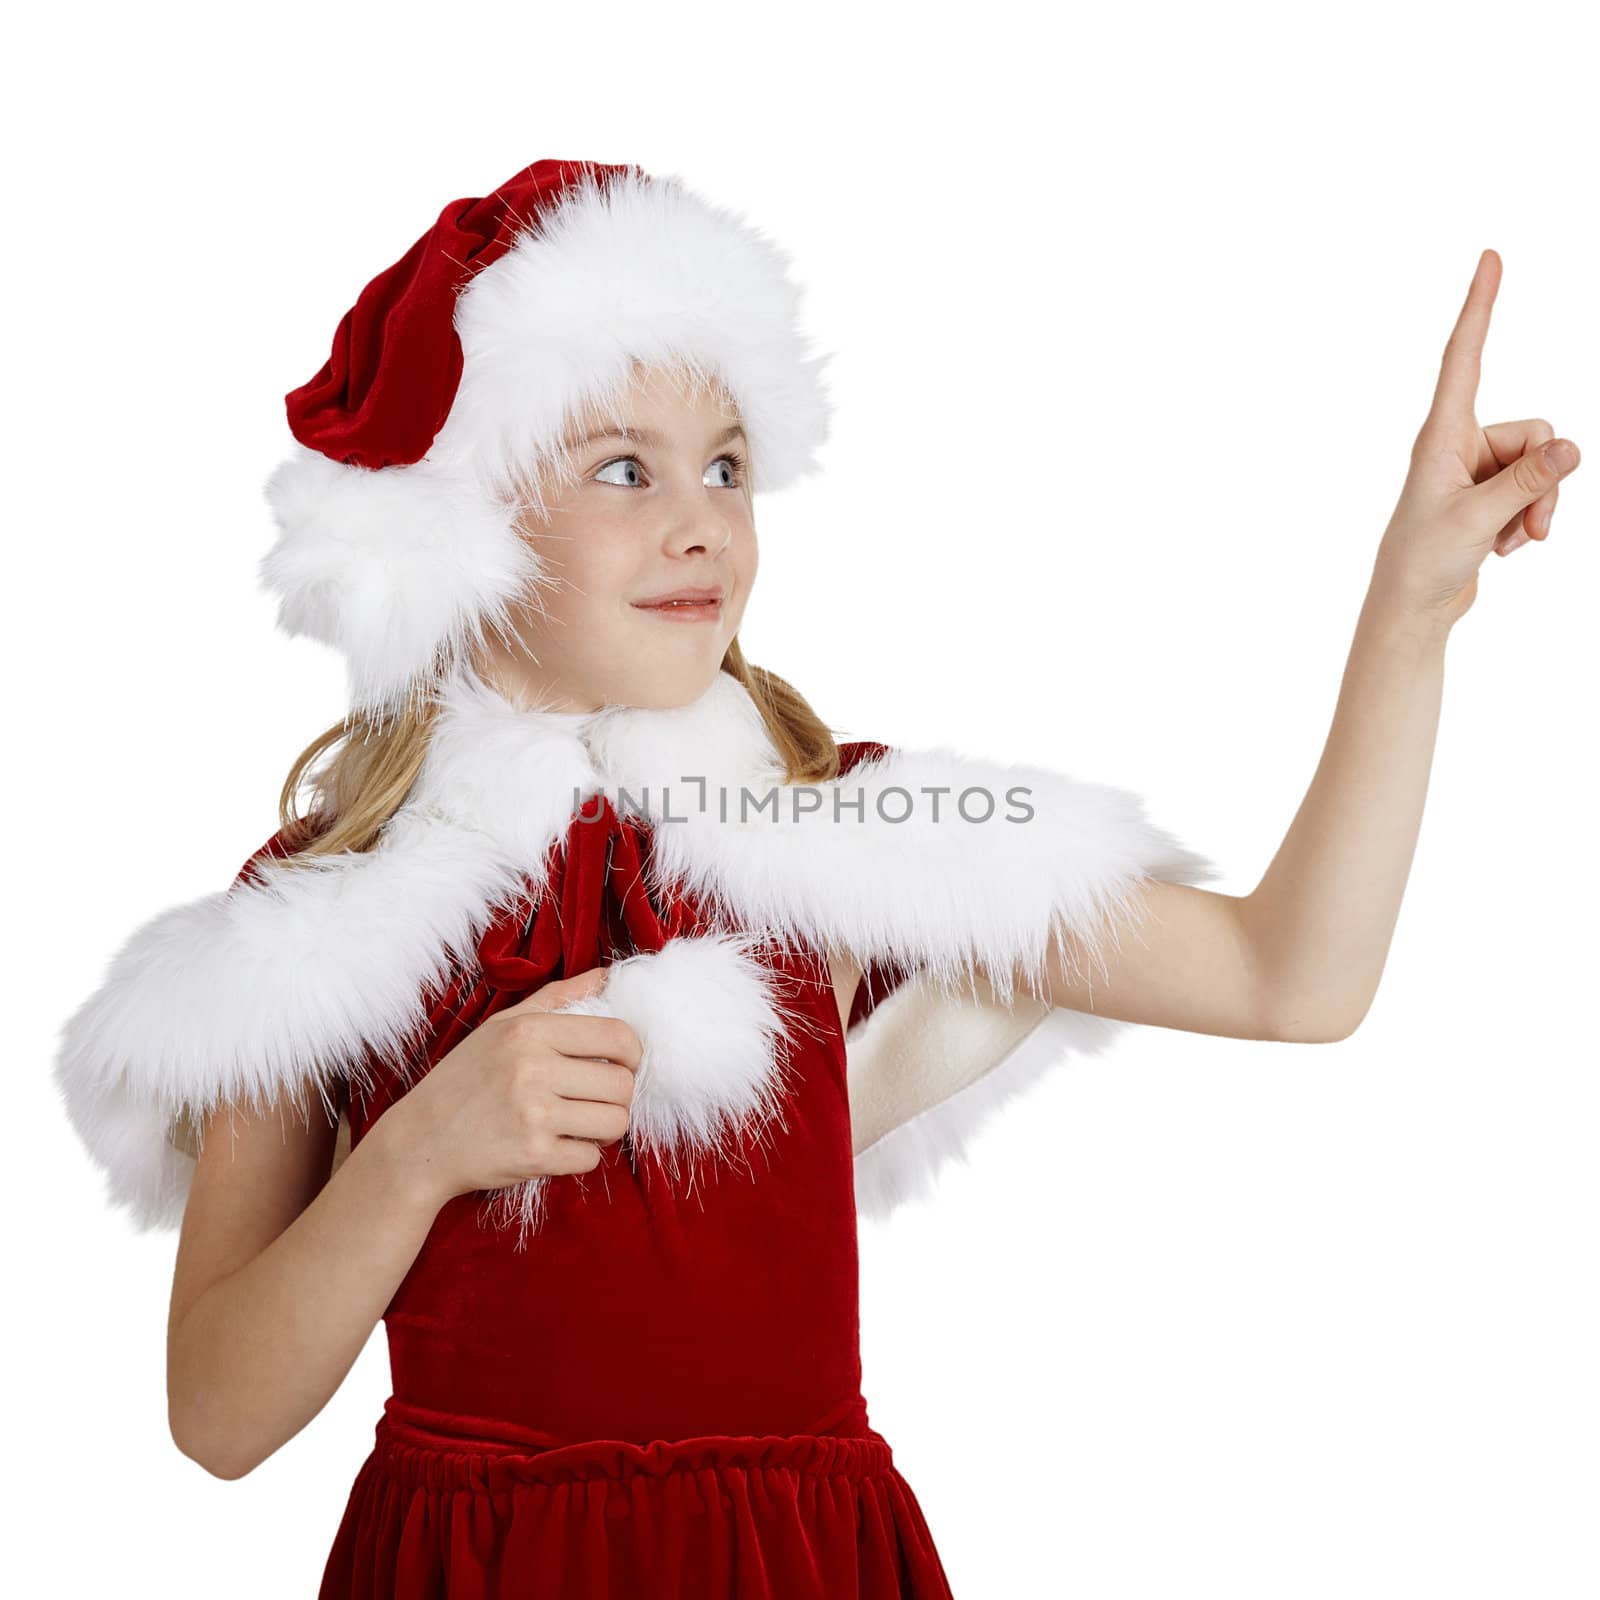 The surprised smiling girl in Christmas clothes points a finger, isolated on a white background